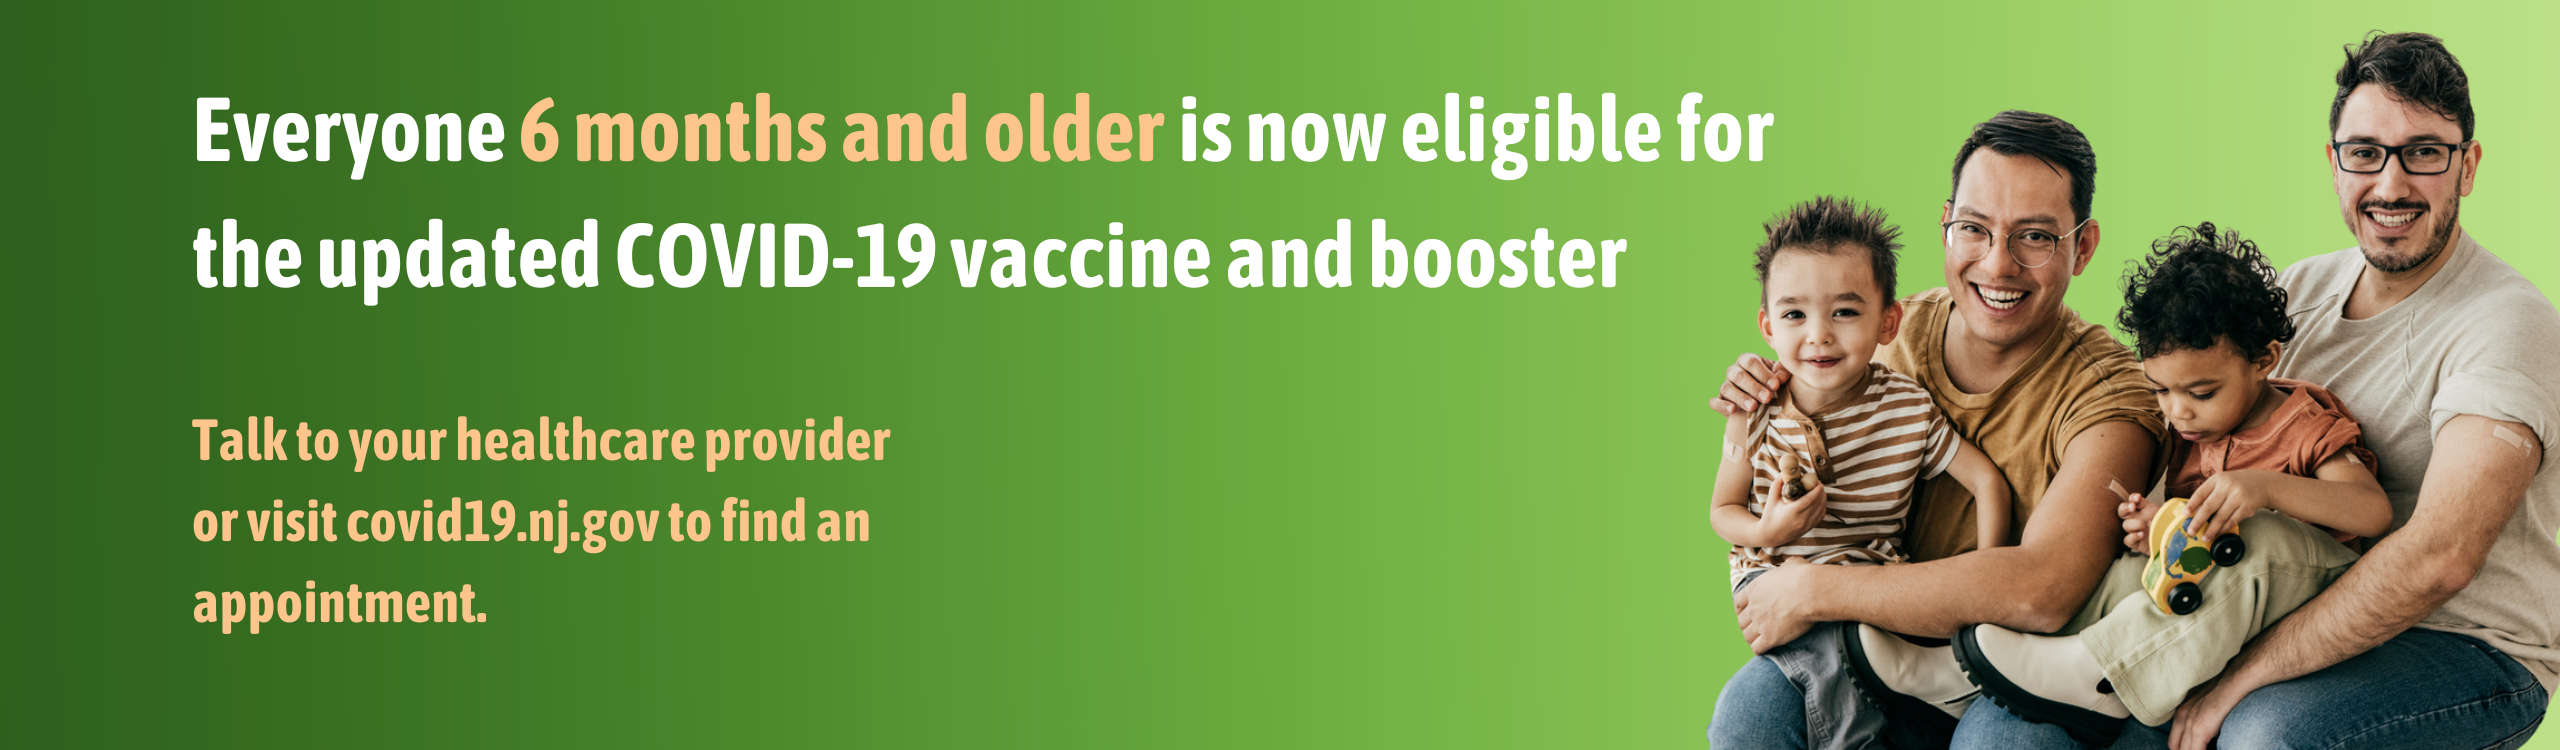 Everyone 6 months and older are now eligible for the updated COVID-19 vaccine and booster. Talk to your healthcare provider or visit covid19.nj.gov to find an appointment.